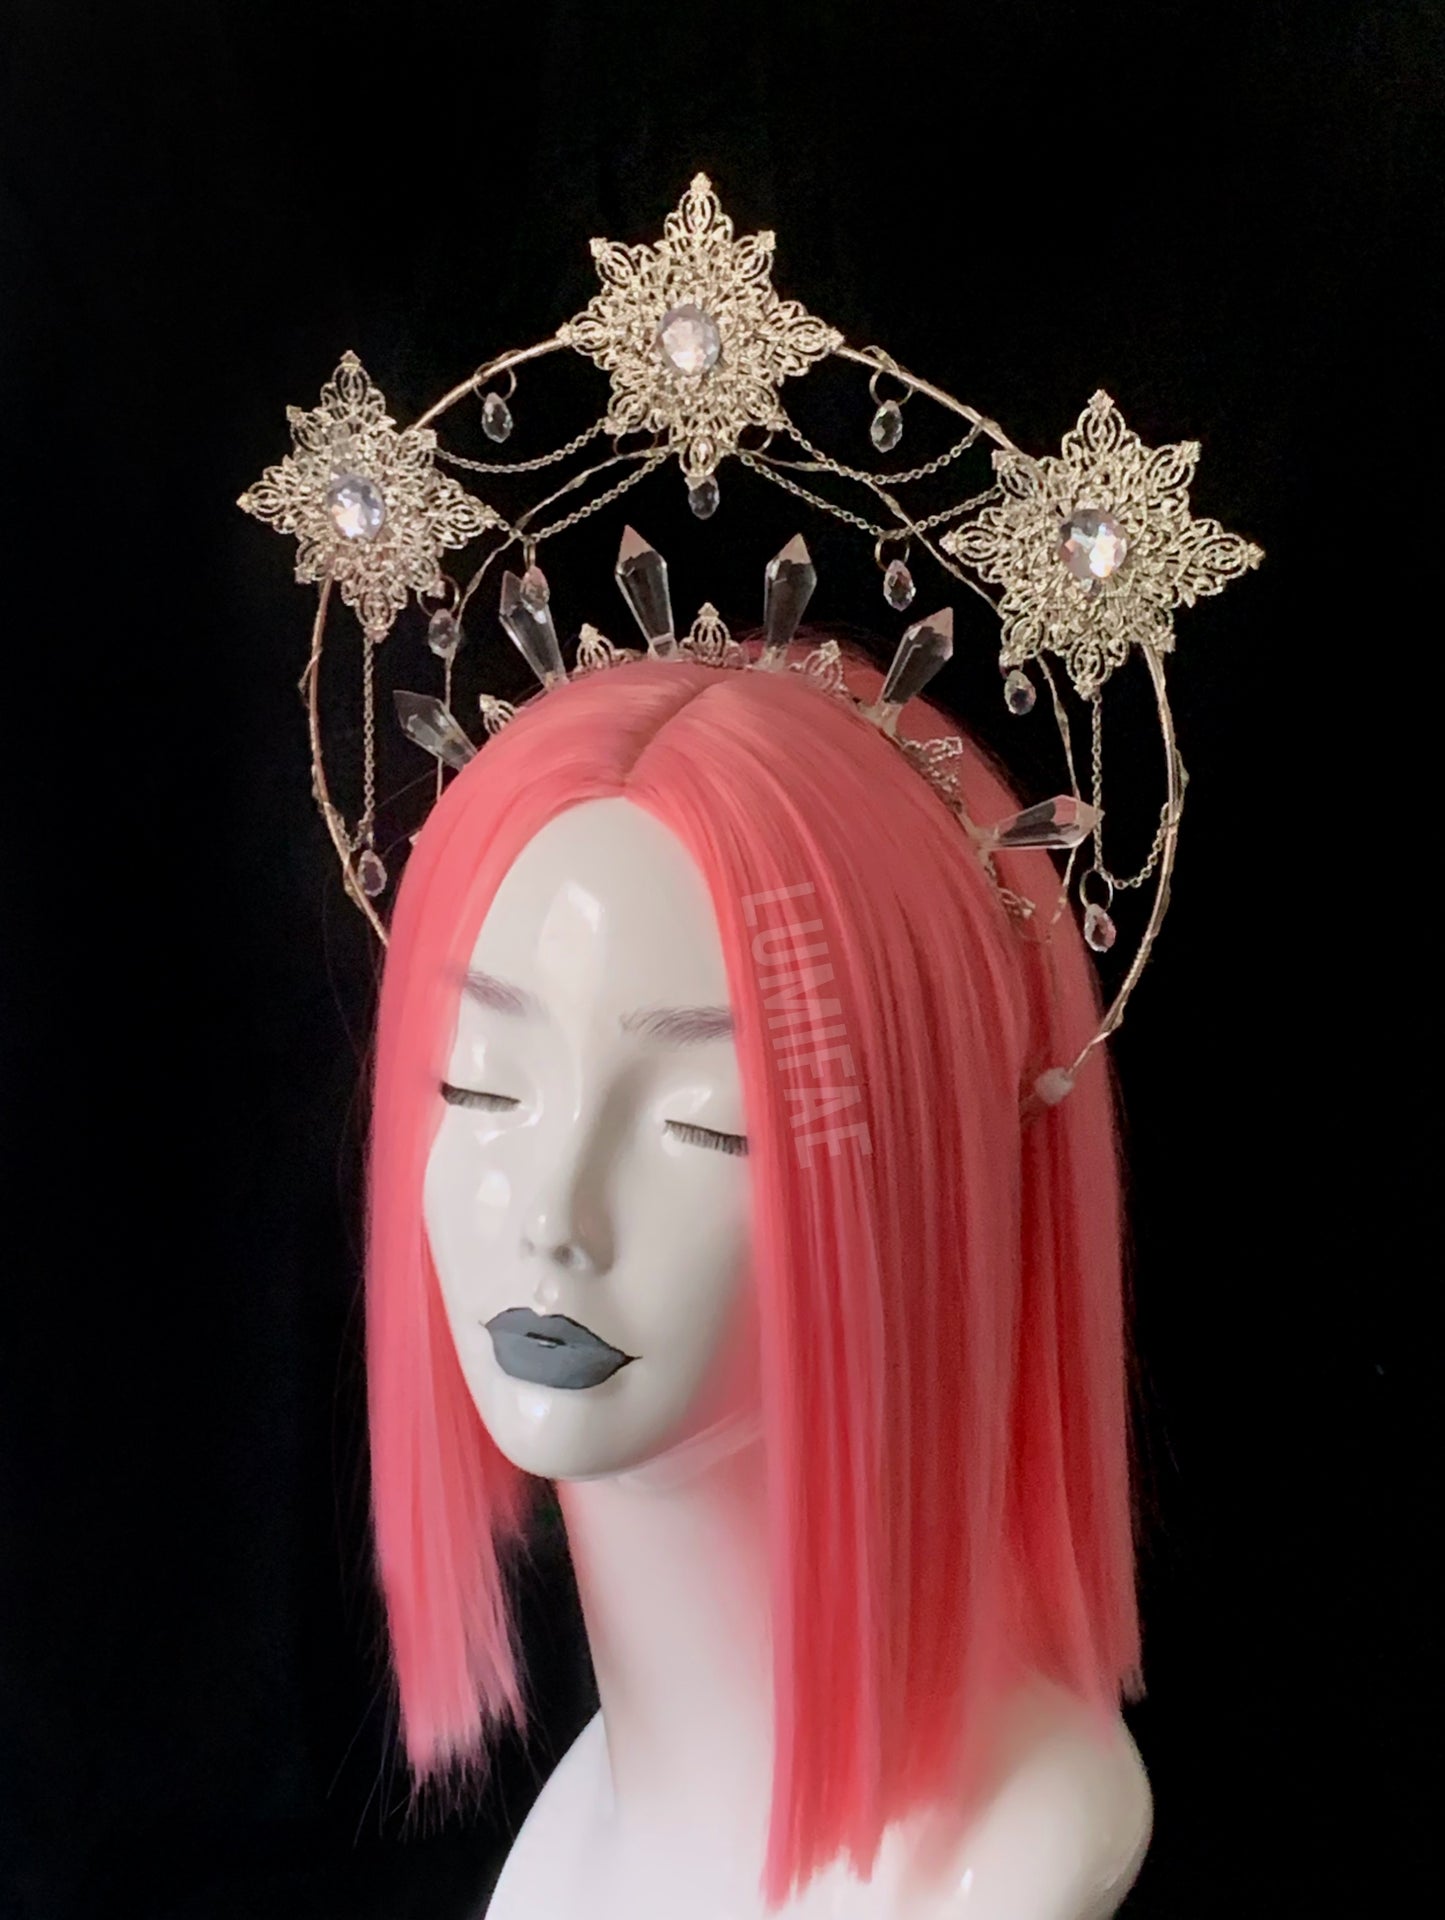 Ethereal Star Goddess Winter Crystal Fairy Queen Crown Snowflake Halo Tiara, One-of-A-Kind